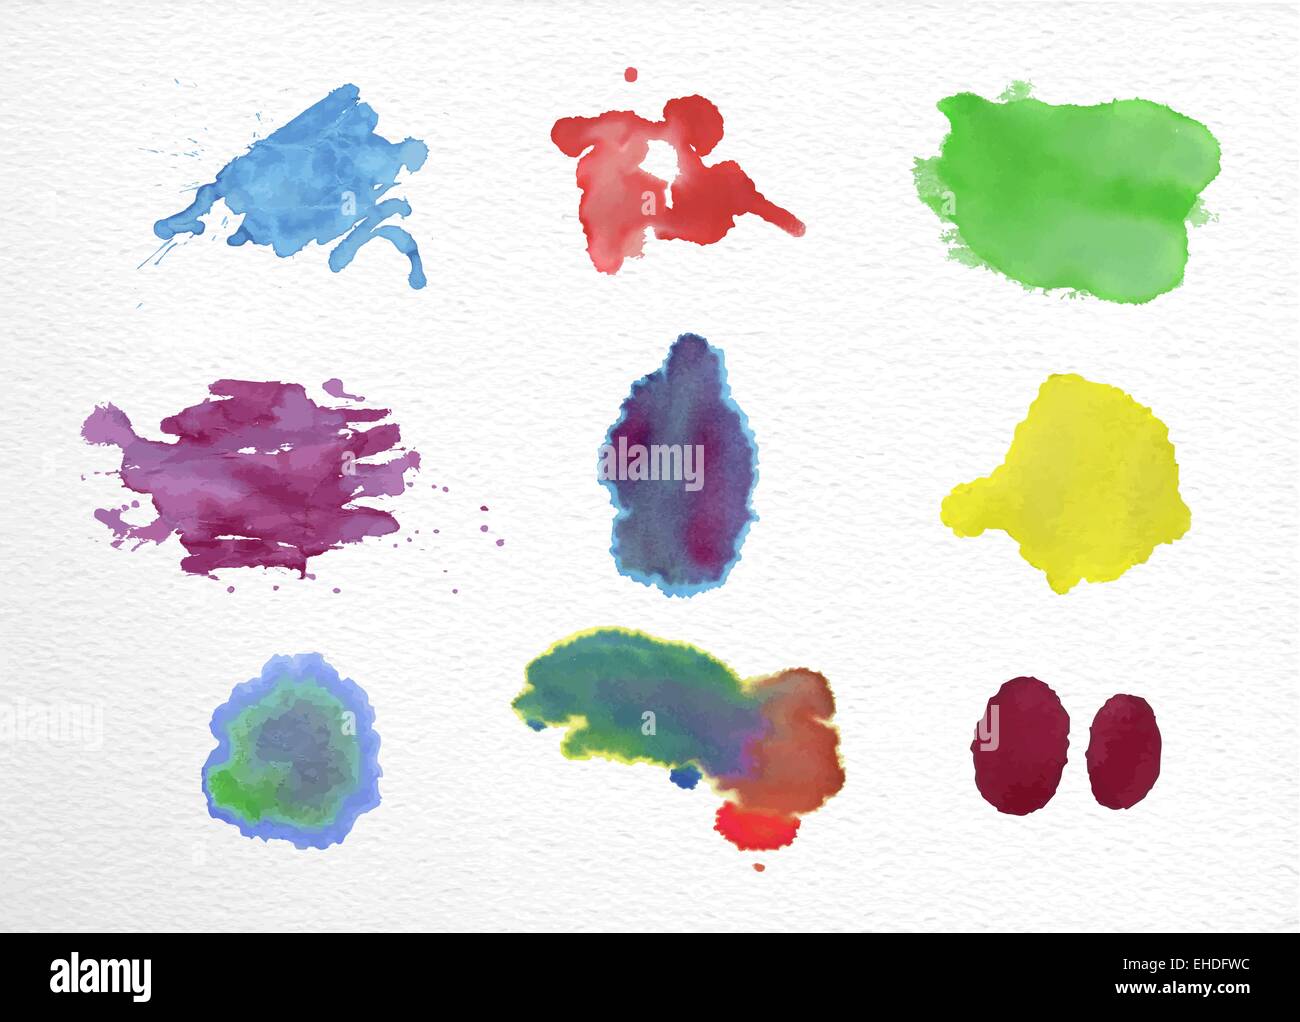 Set of watercolor stains elements hand drawn illustration. EPS10 vector file organized in layers for easy editing. Stock Vector